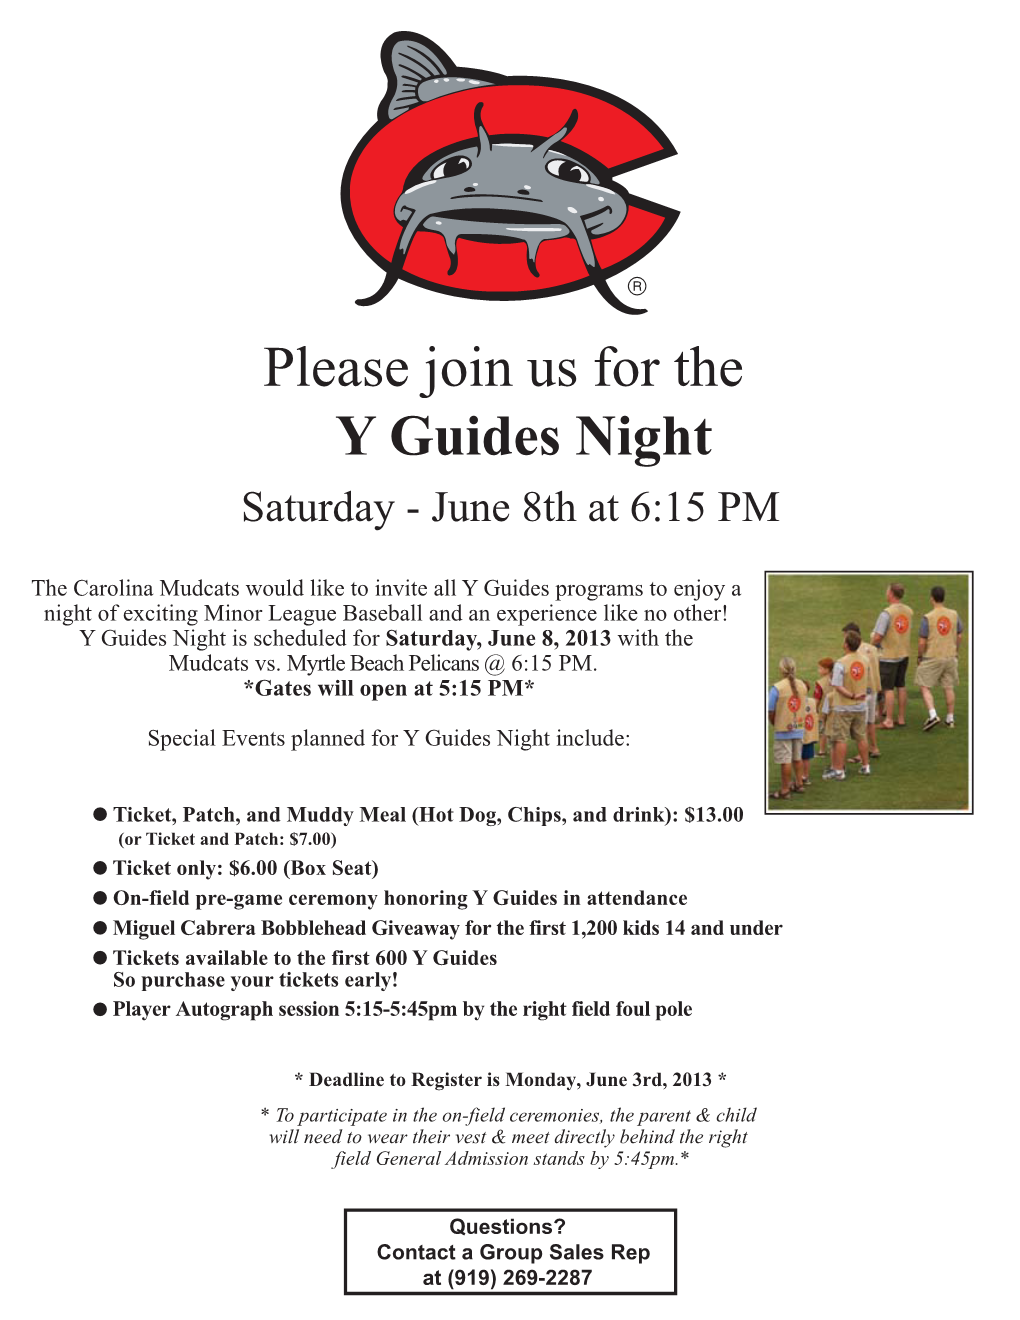 Please Join Us for the Y Guides Night Saturday - June 8Th at 6:15 PM